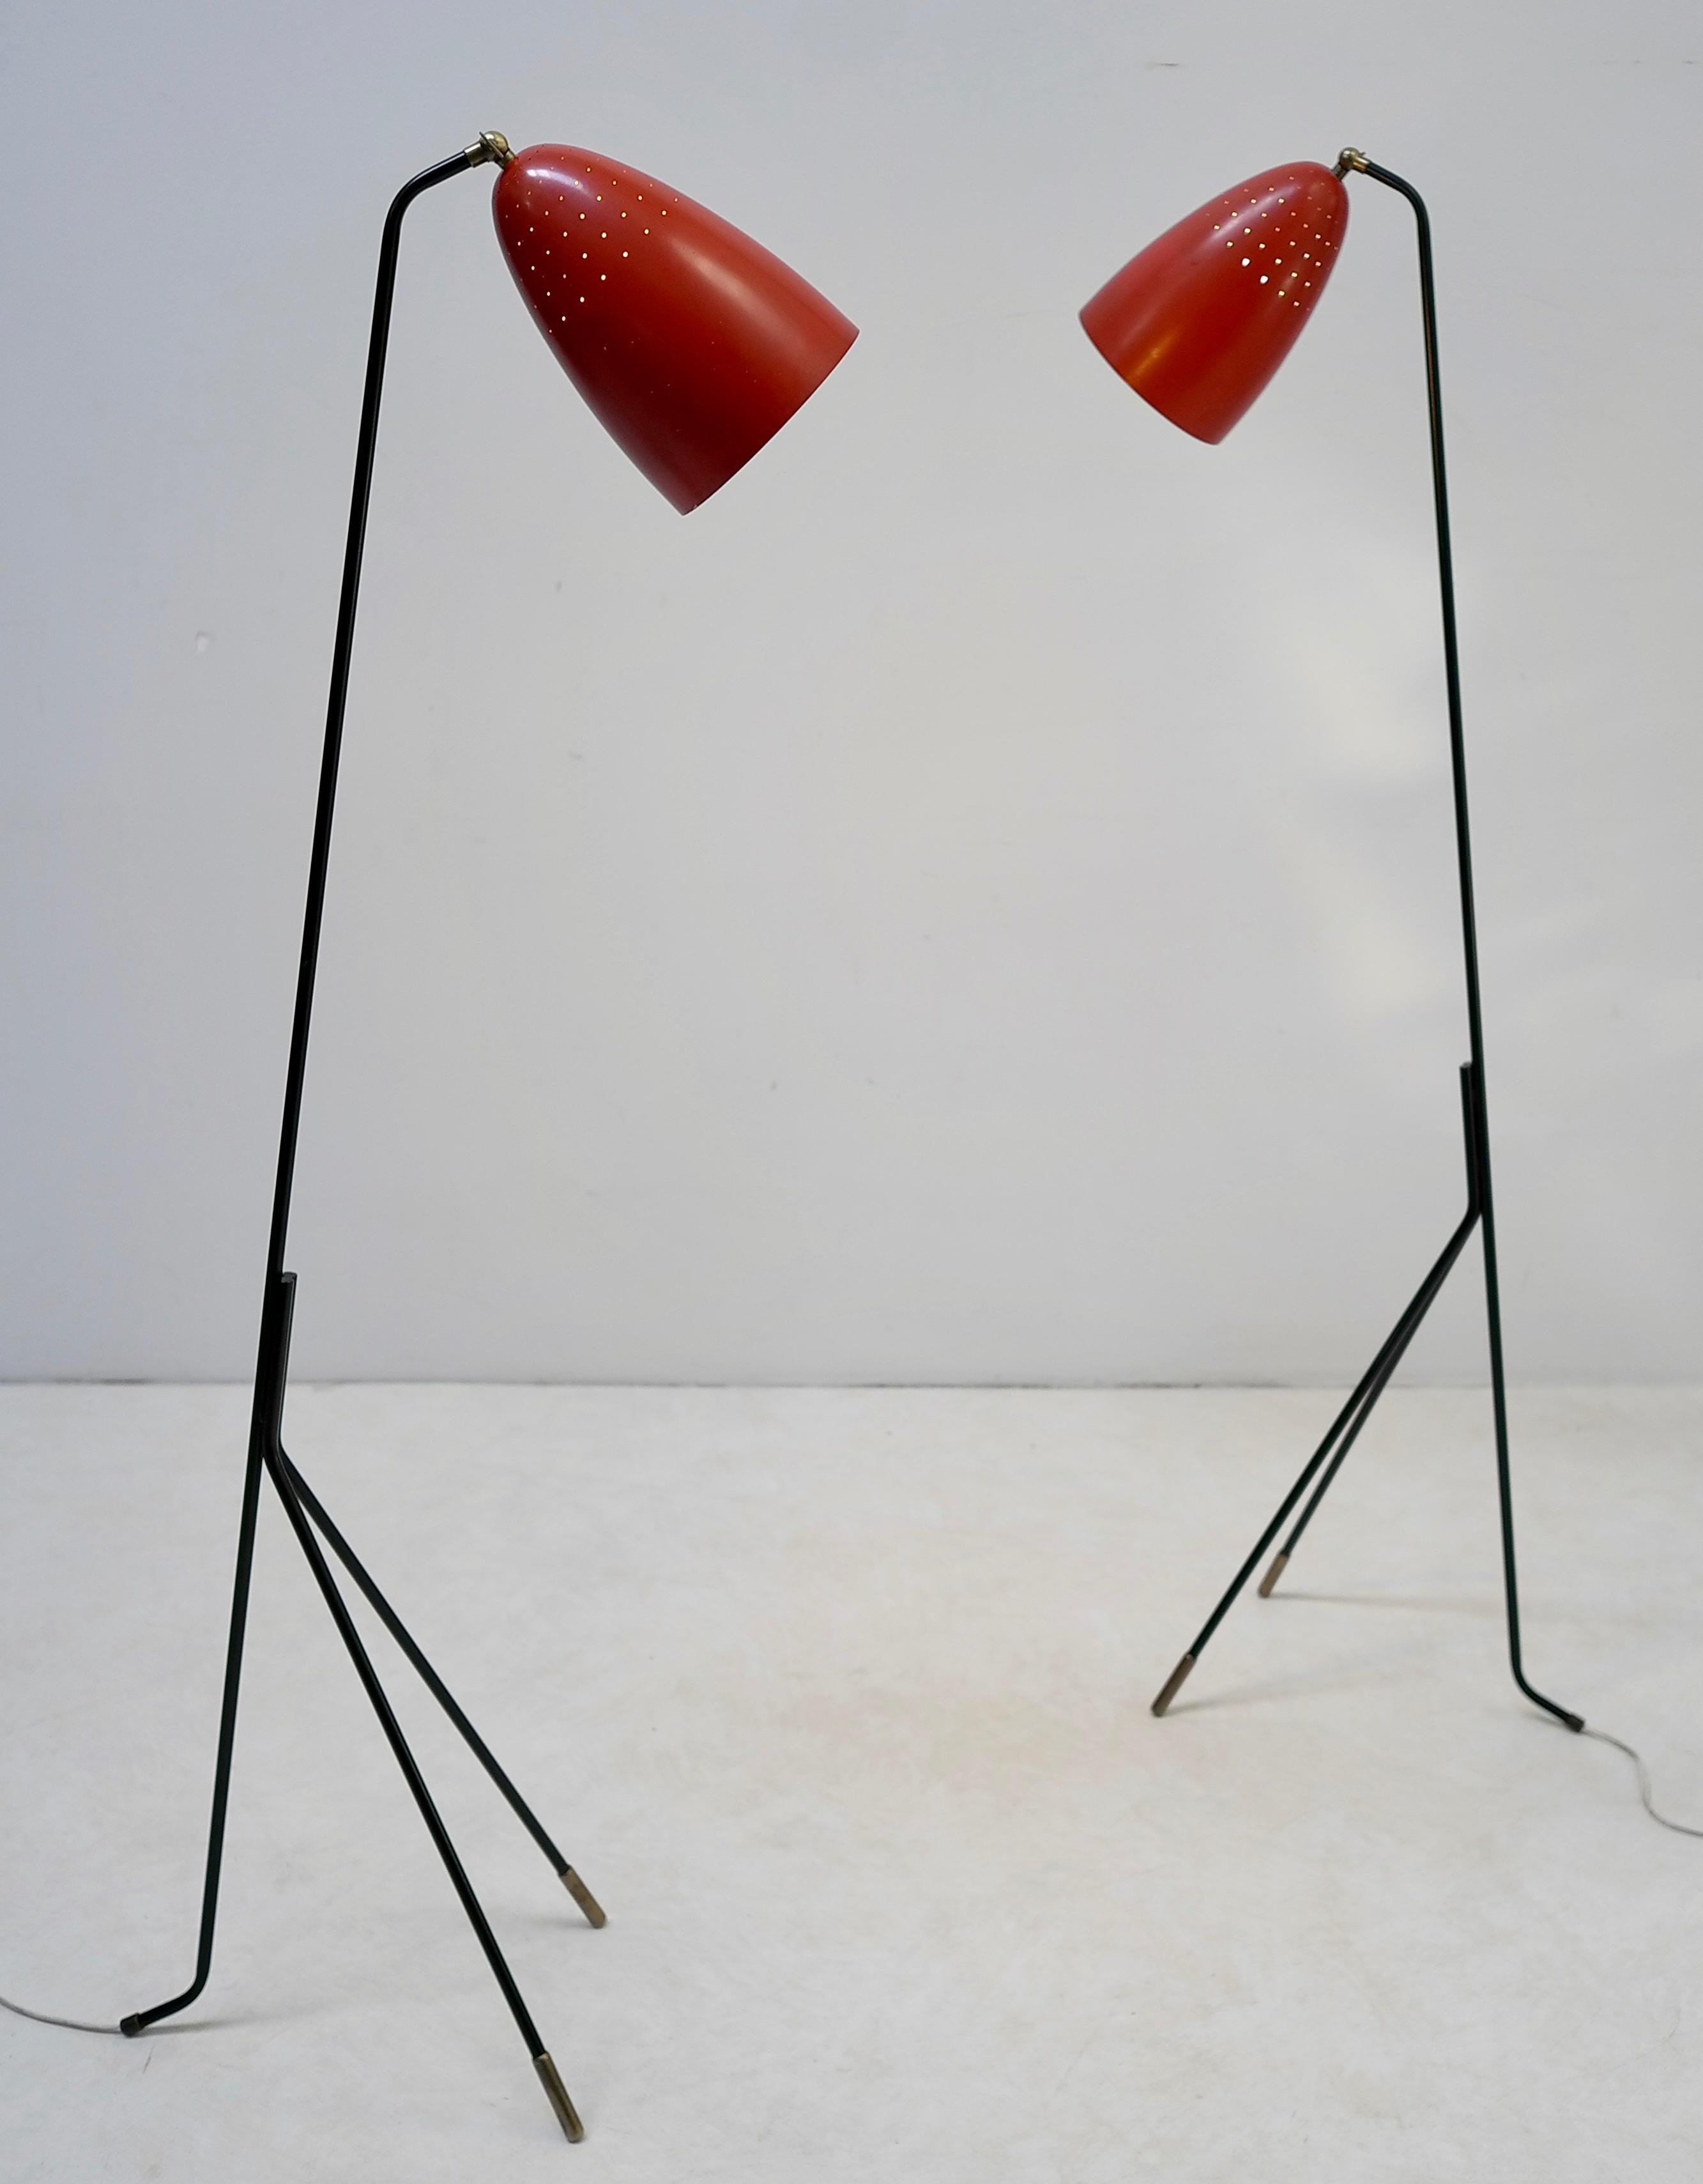 Pair of Red Danish Grasshopper Floor Lamps by Svend Aage Holm Sørensen For Sale 3